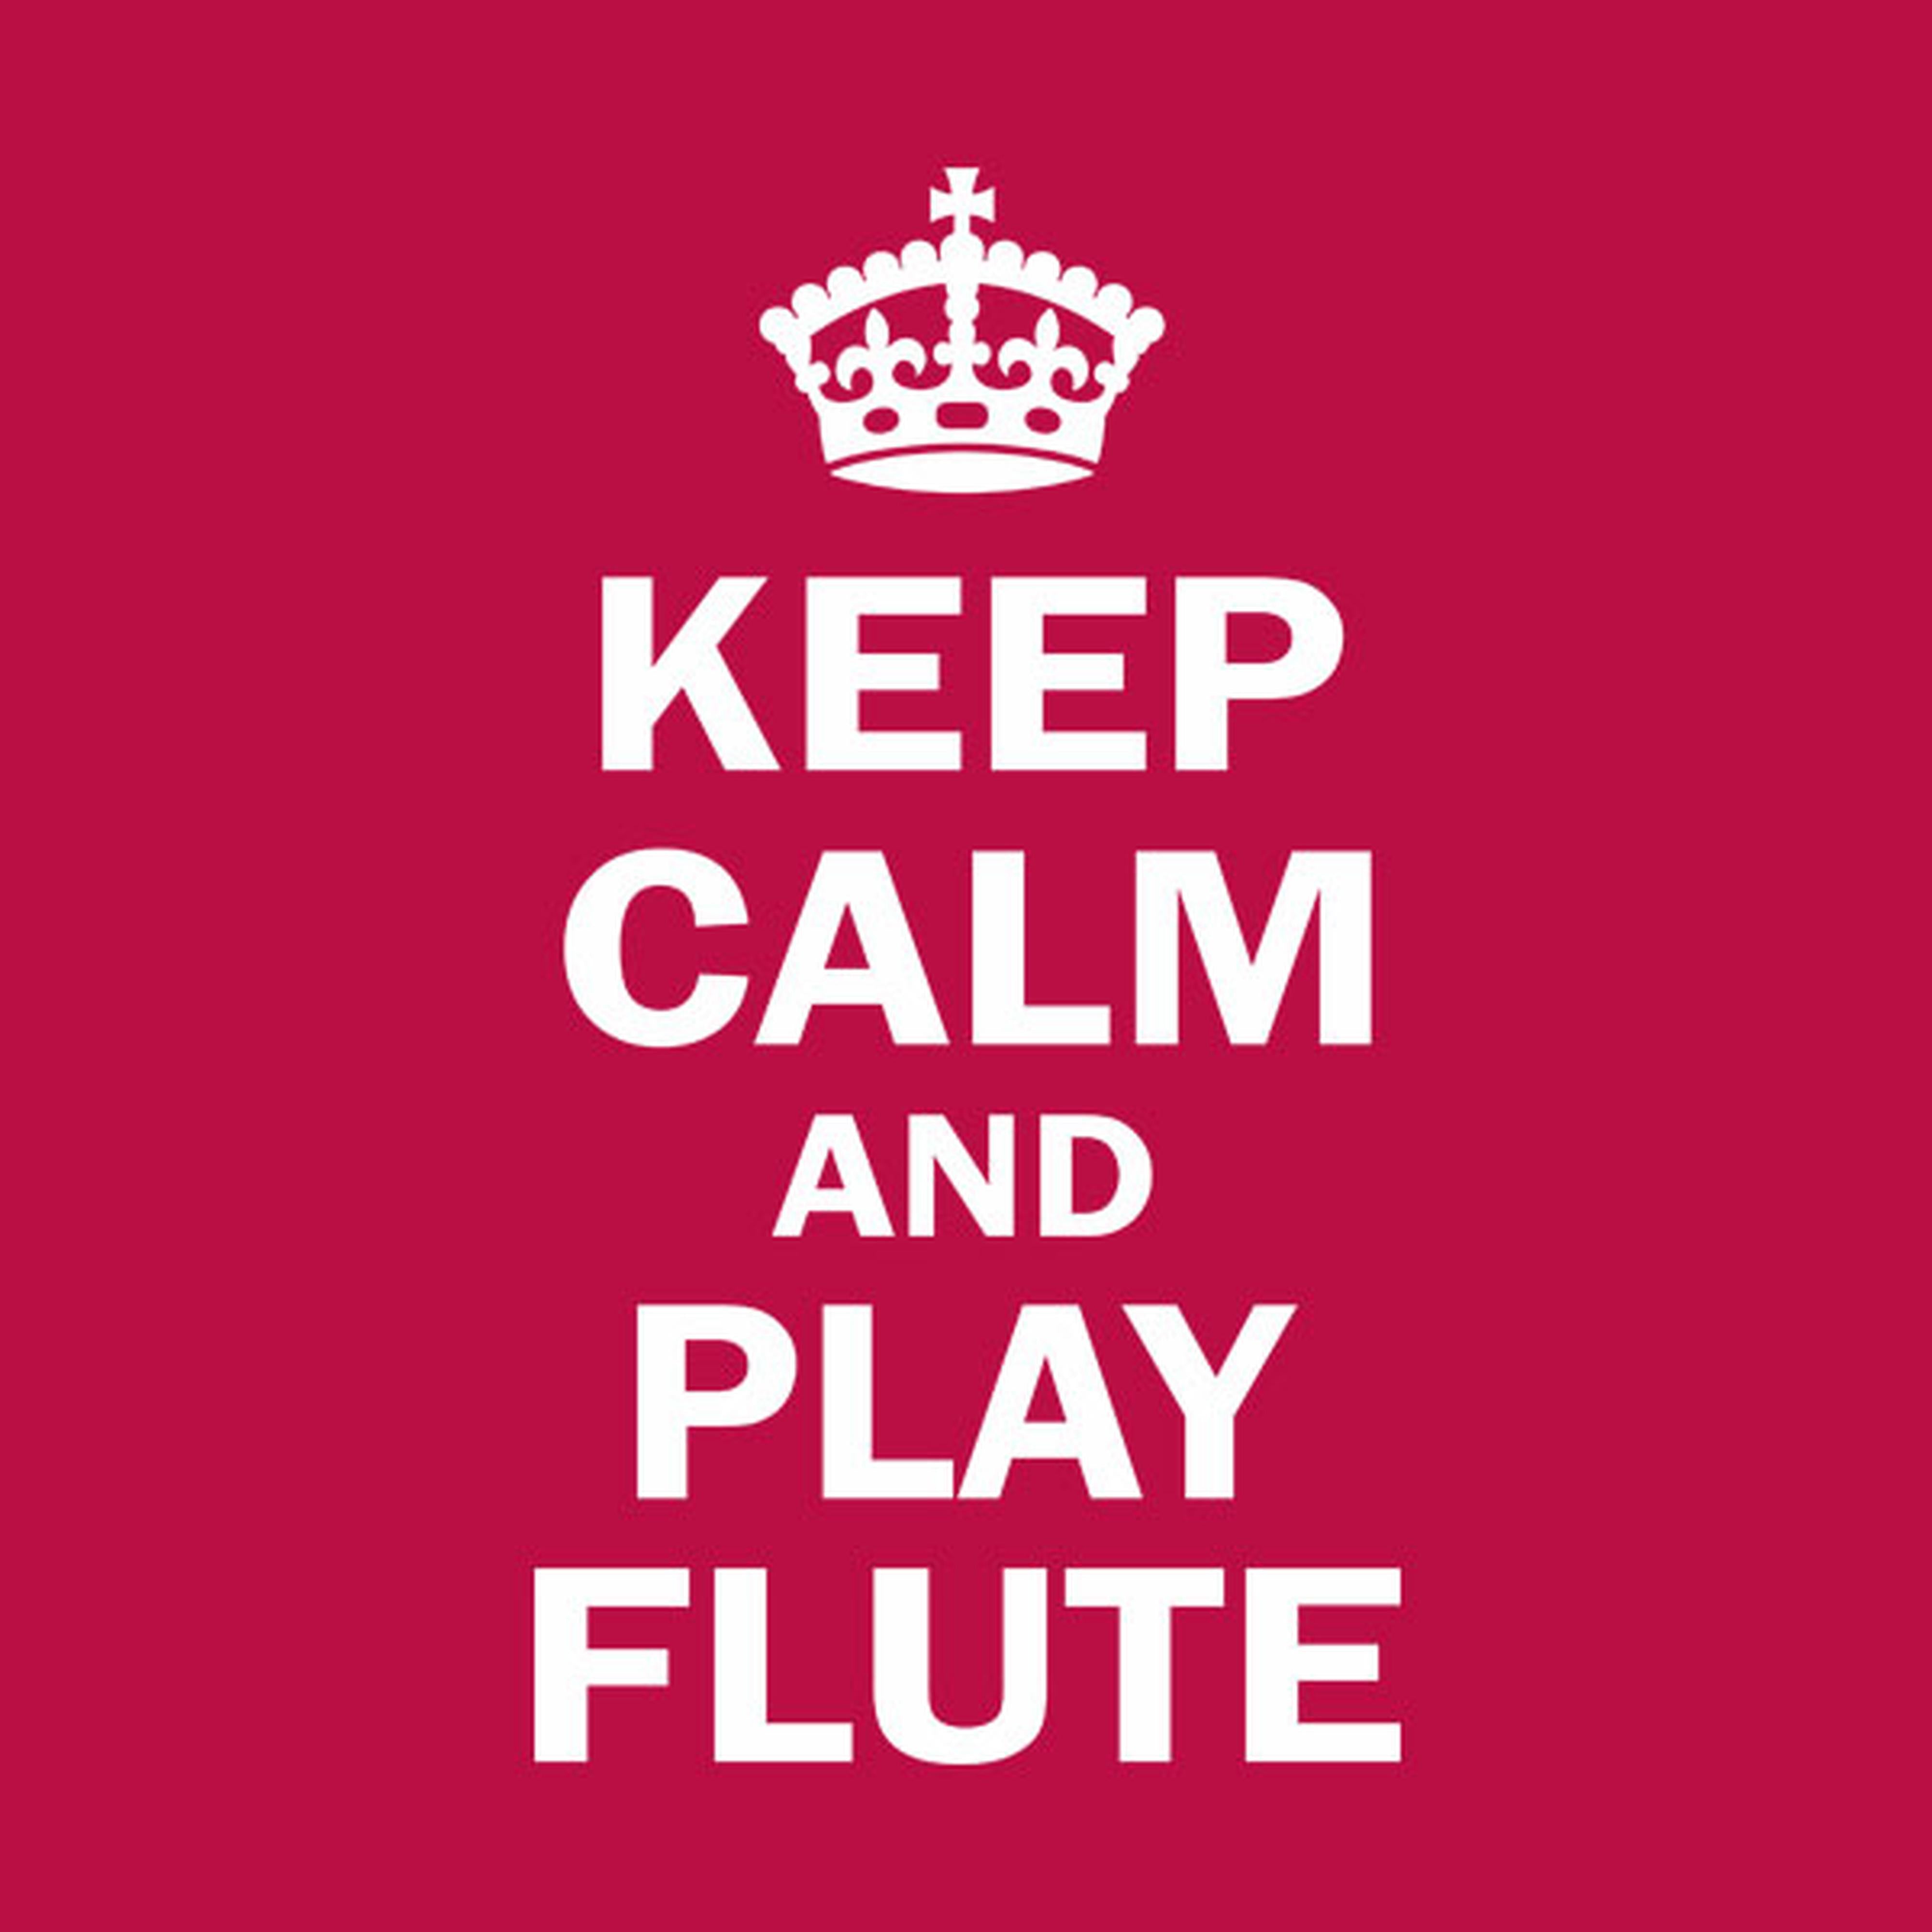 Keep calm and play flute T-shirt